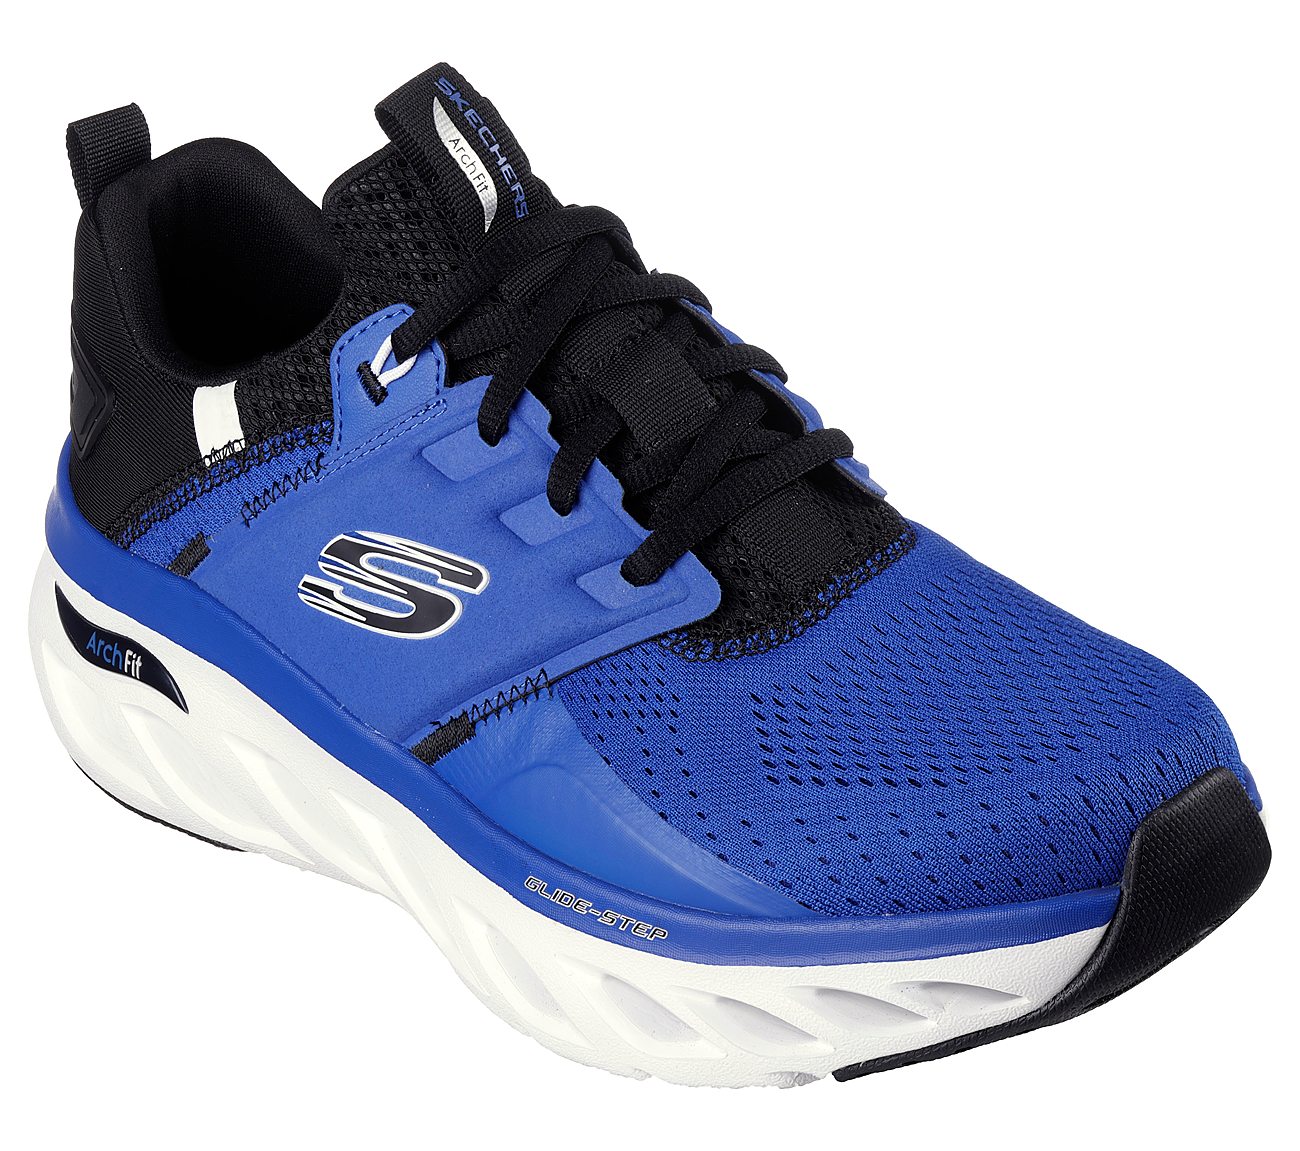 ARCH FIT GLIDE-STEP, BLUE/BLACK Footwear Right View